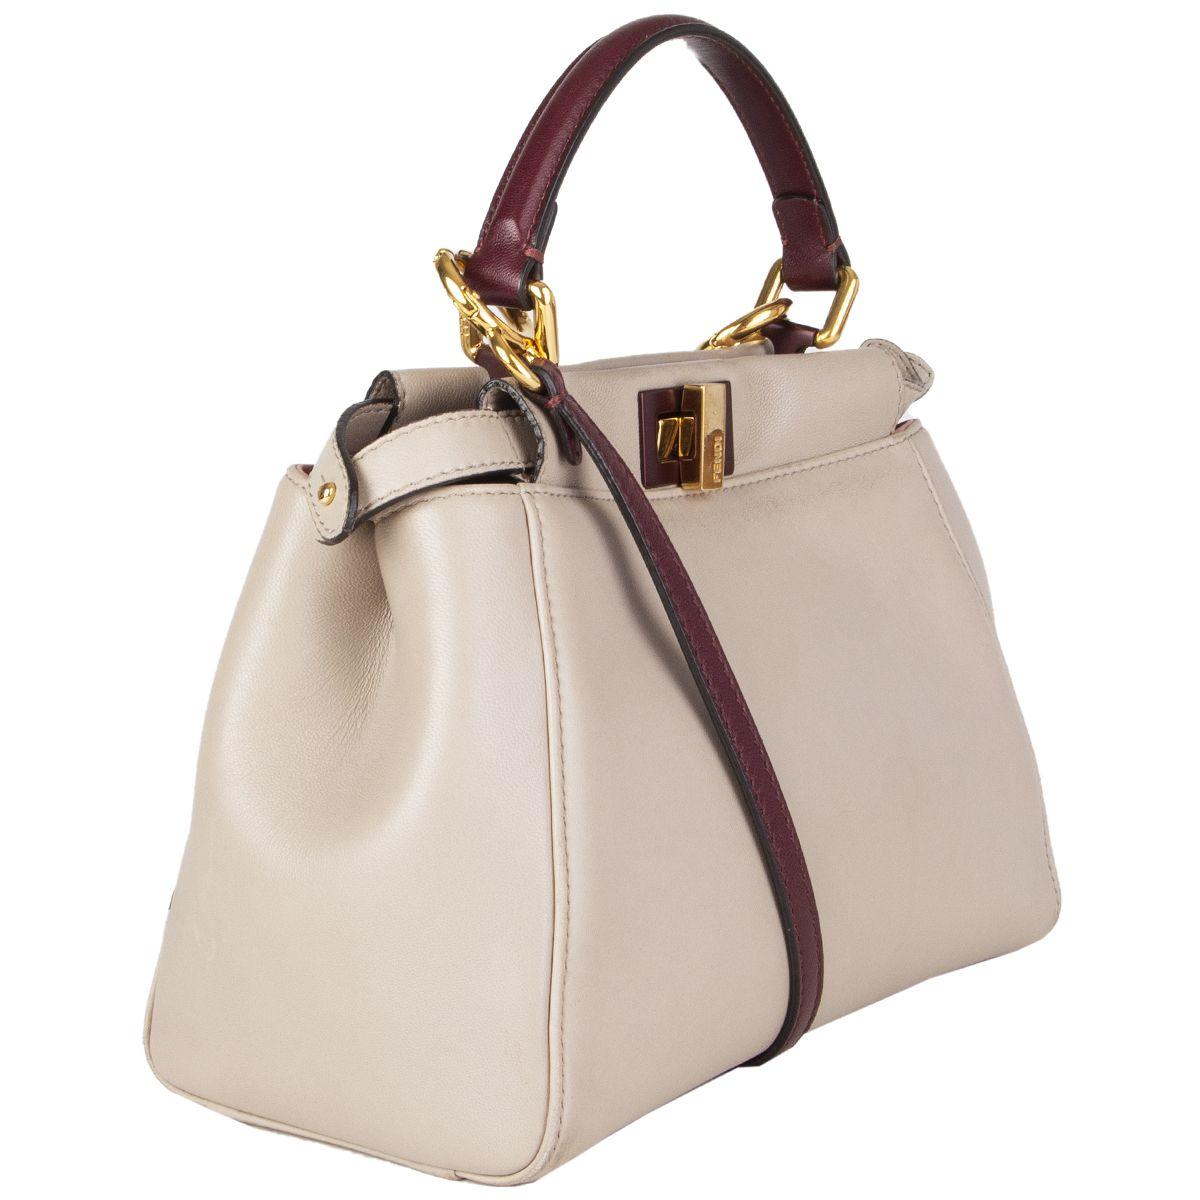 Fendi 'Peekaboo Mini' in light taupe nappa leather with burgundy handle and shoulder strap featuring gold-tone hardware. Opens with turn-lock to a dual-compartment interior with one zipper pocket and slip pocket in the middle. Lined in baby pink